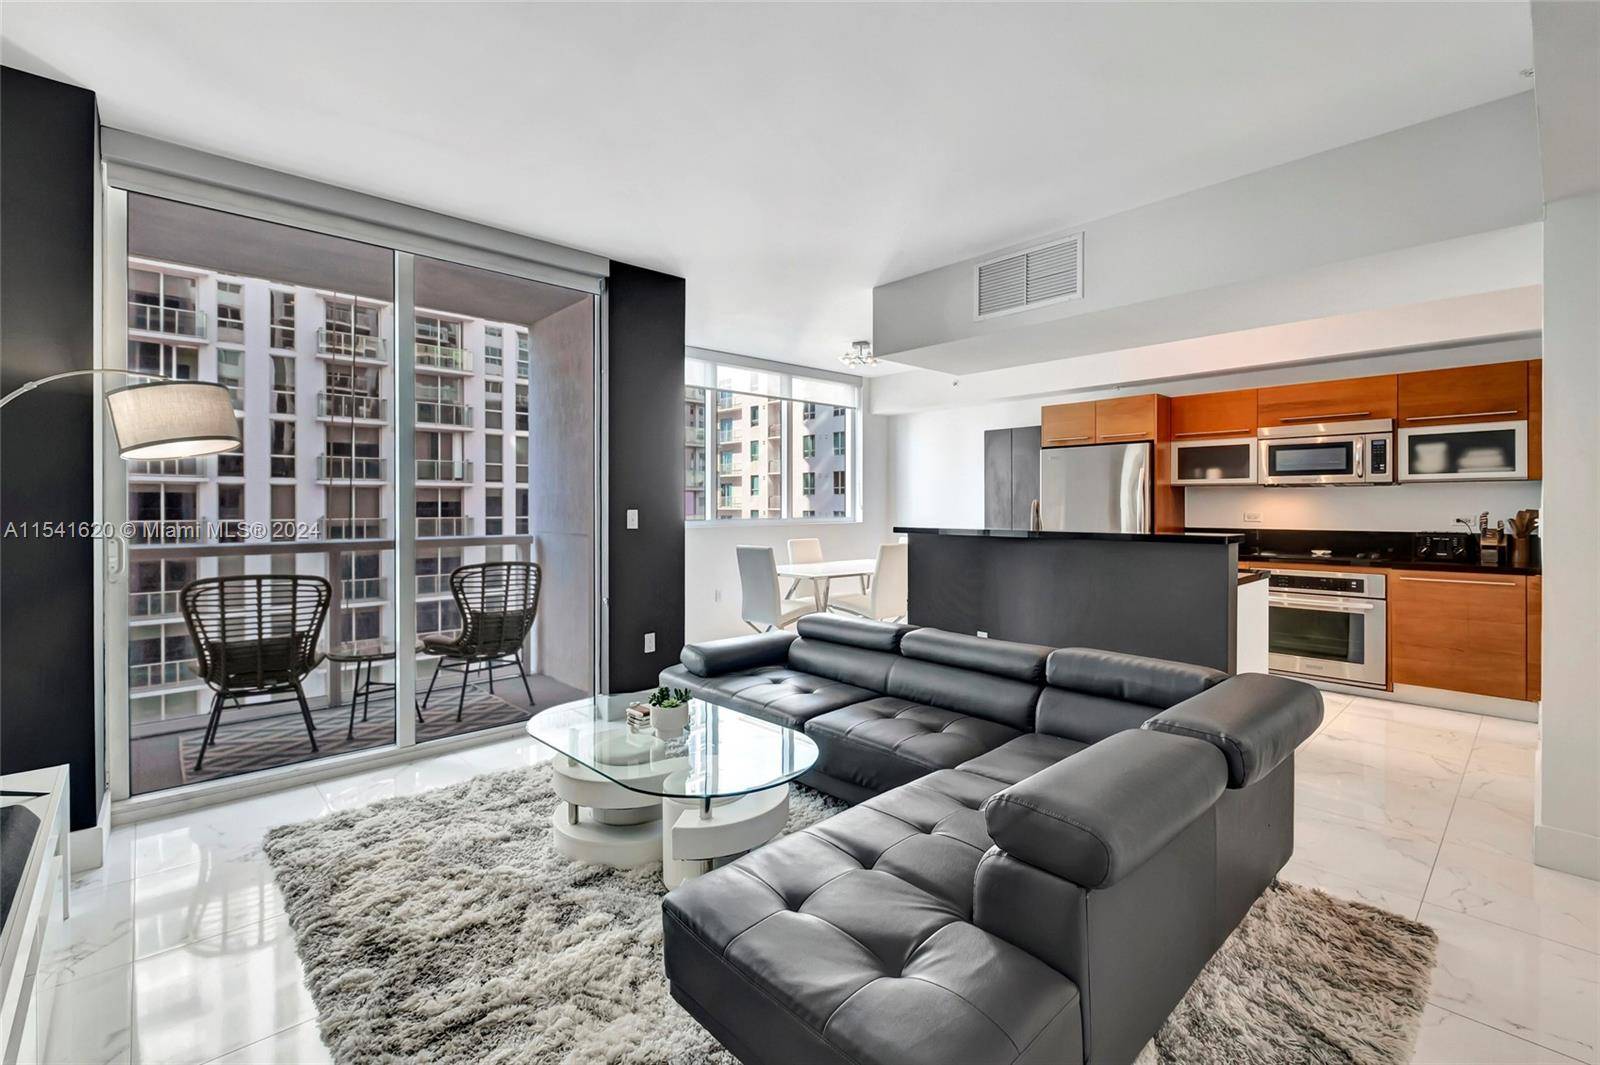 Welcome to one of the most unique floor plans in all of Downtown Miami.